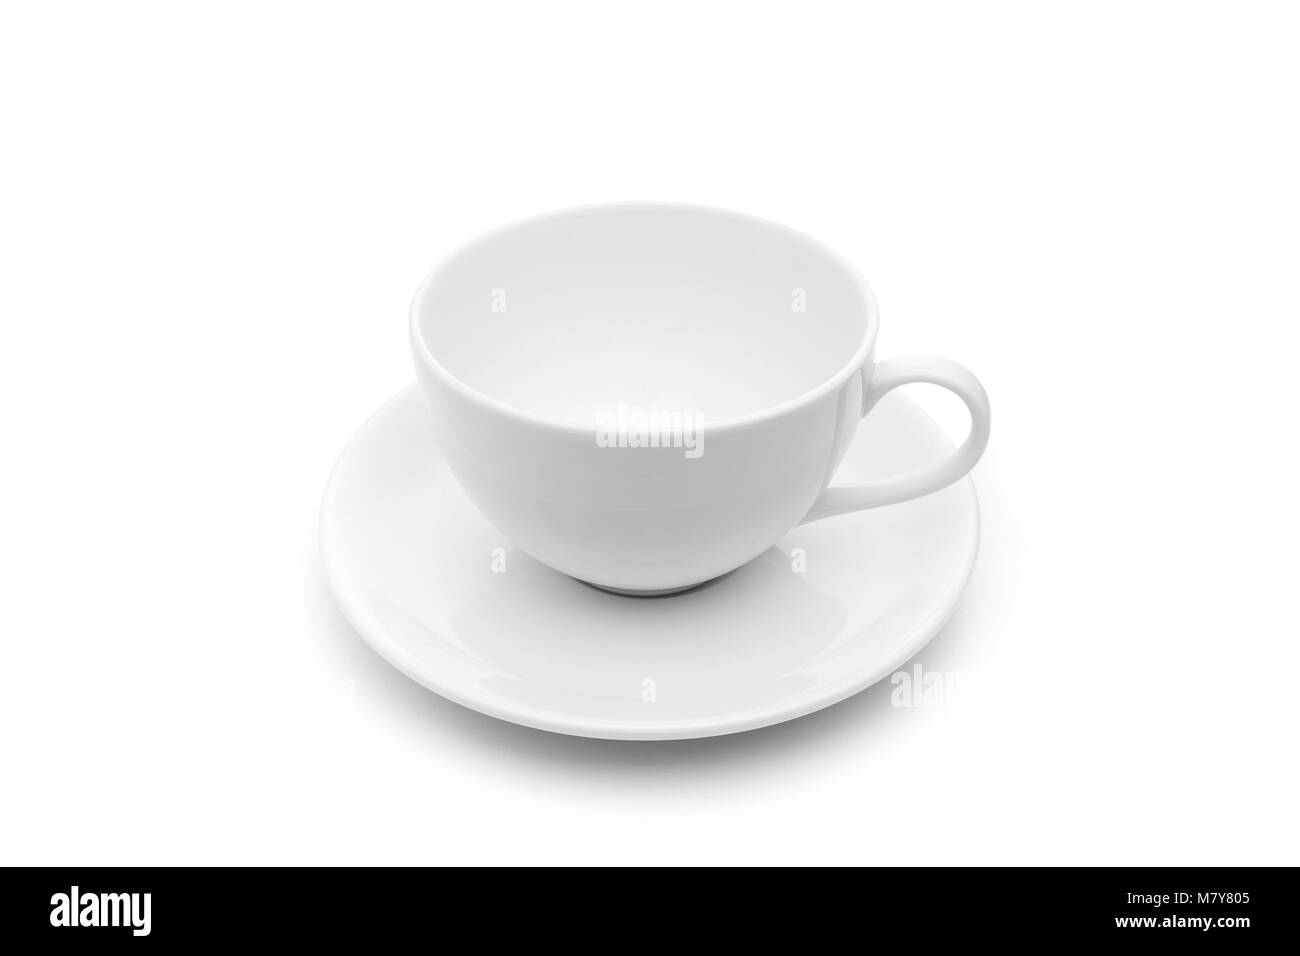 White new empty coffee cup or cup for hot drink. Studio shot and isolated on white background Stock Photo